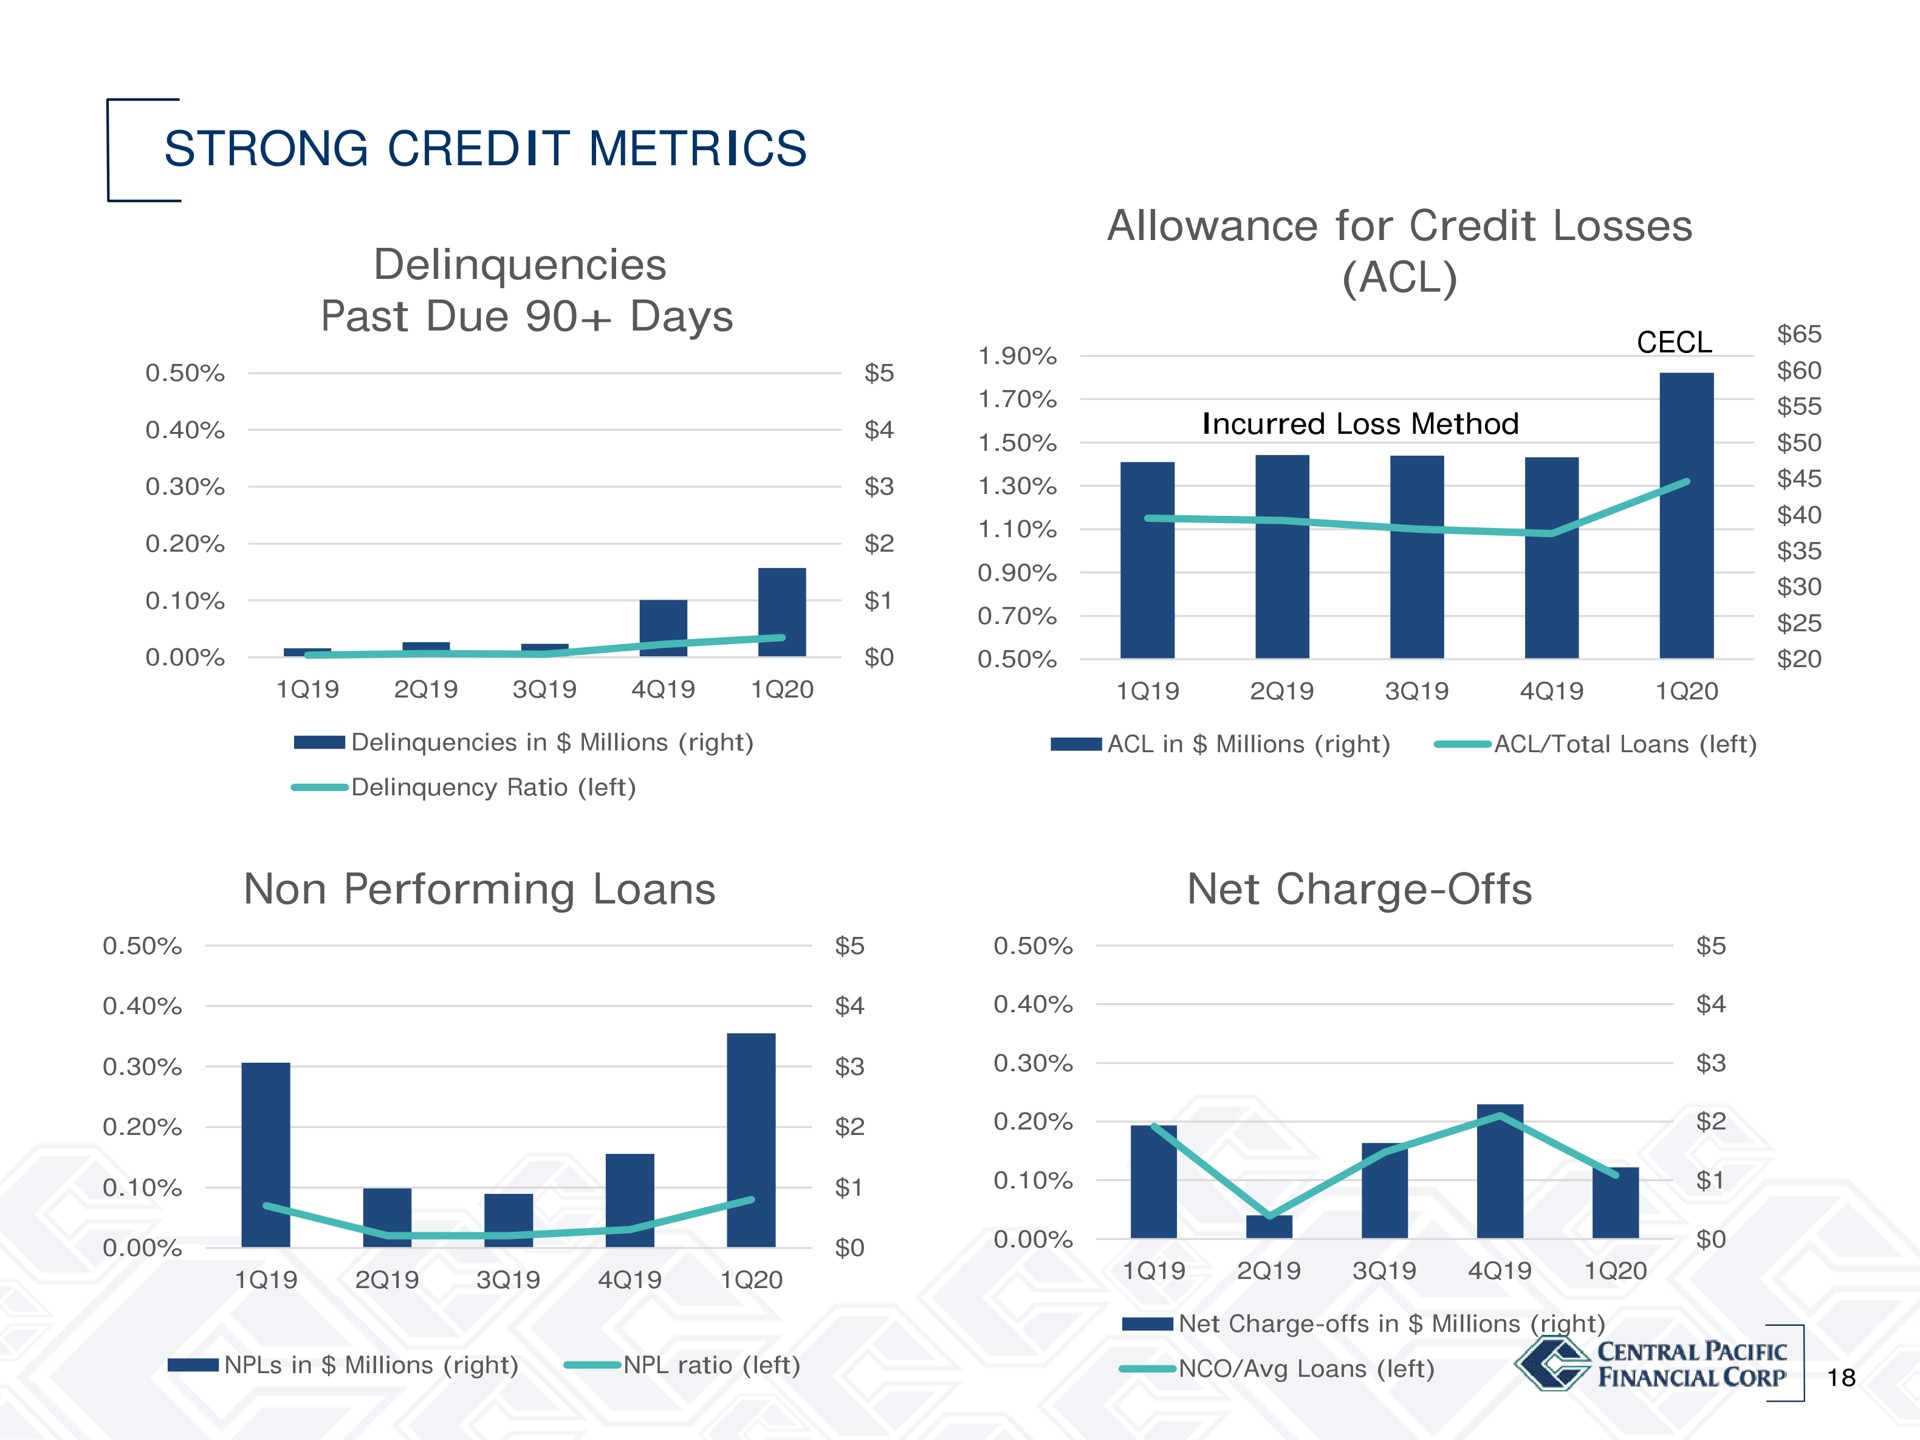 strong credit metrics delinquencies past due days allowance for credit losses non performing loans net charge offs | Central Pacific Financial